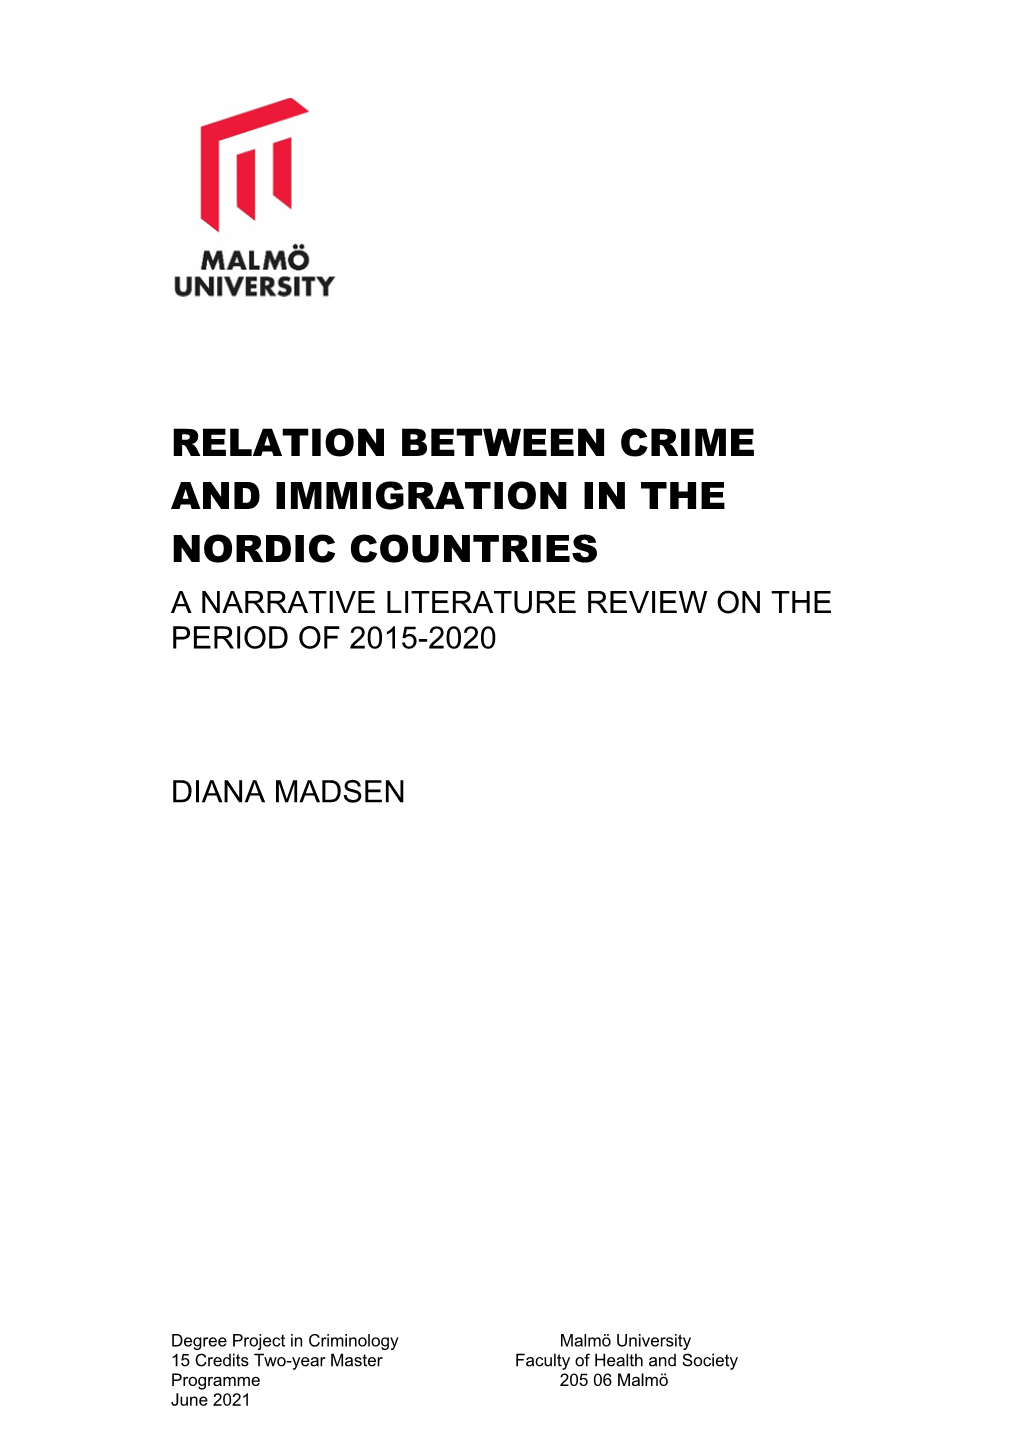 Relation Between Crime and Immigration in the Nordic Countries a Narrative Literature Review on the Period of 2015-2020